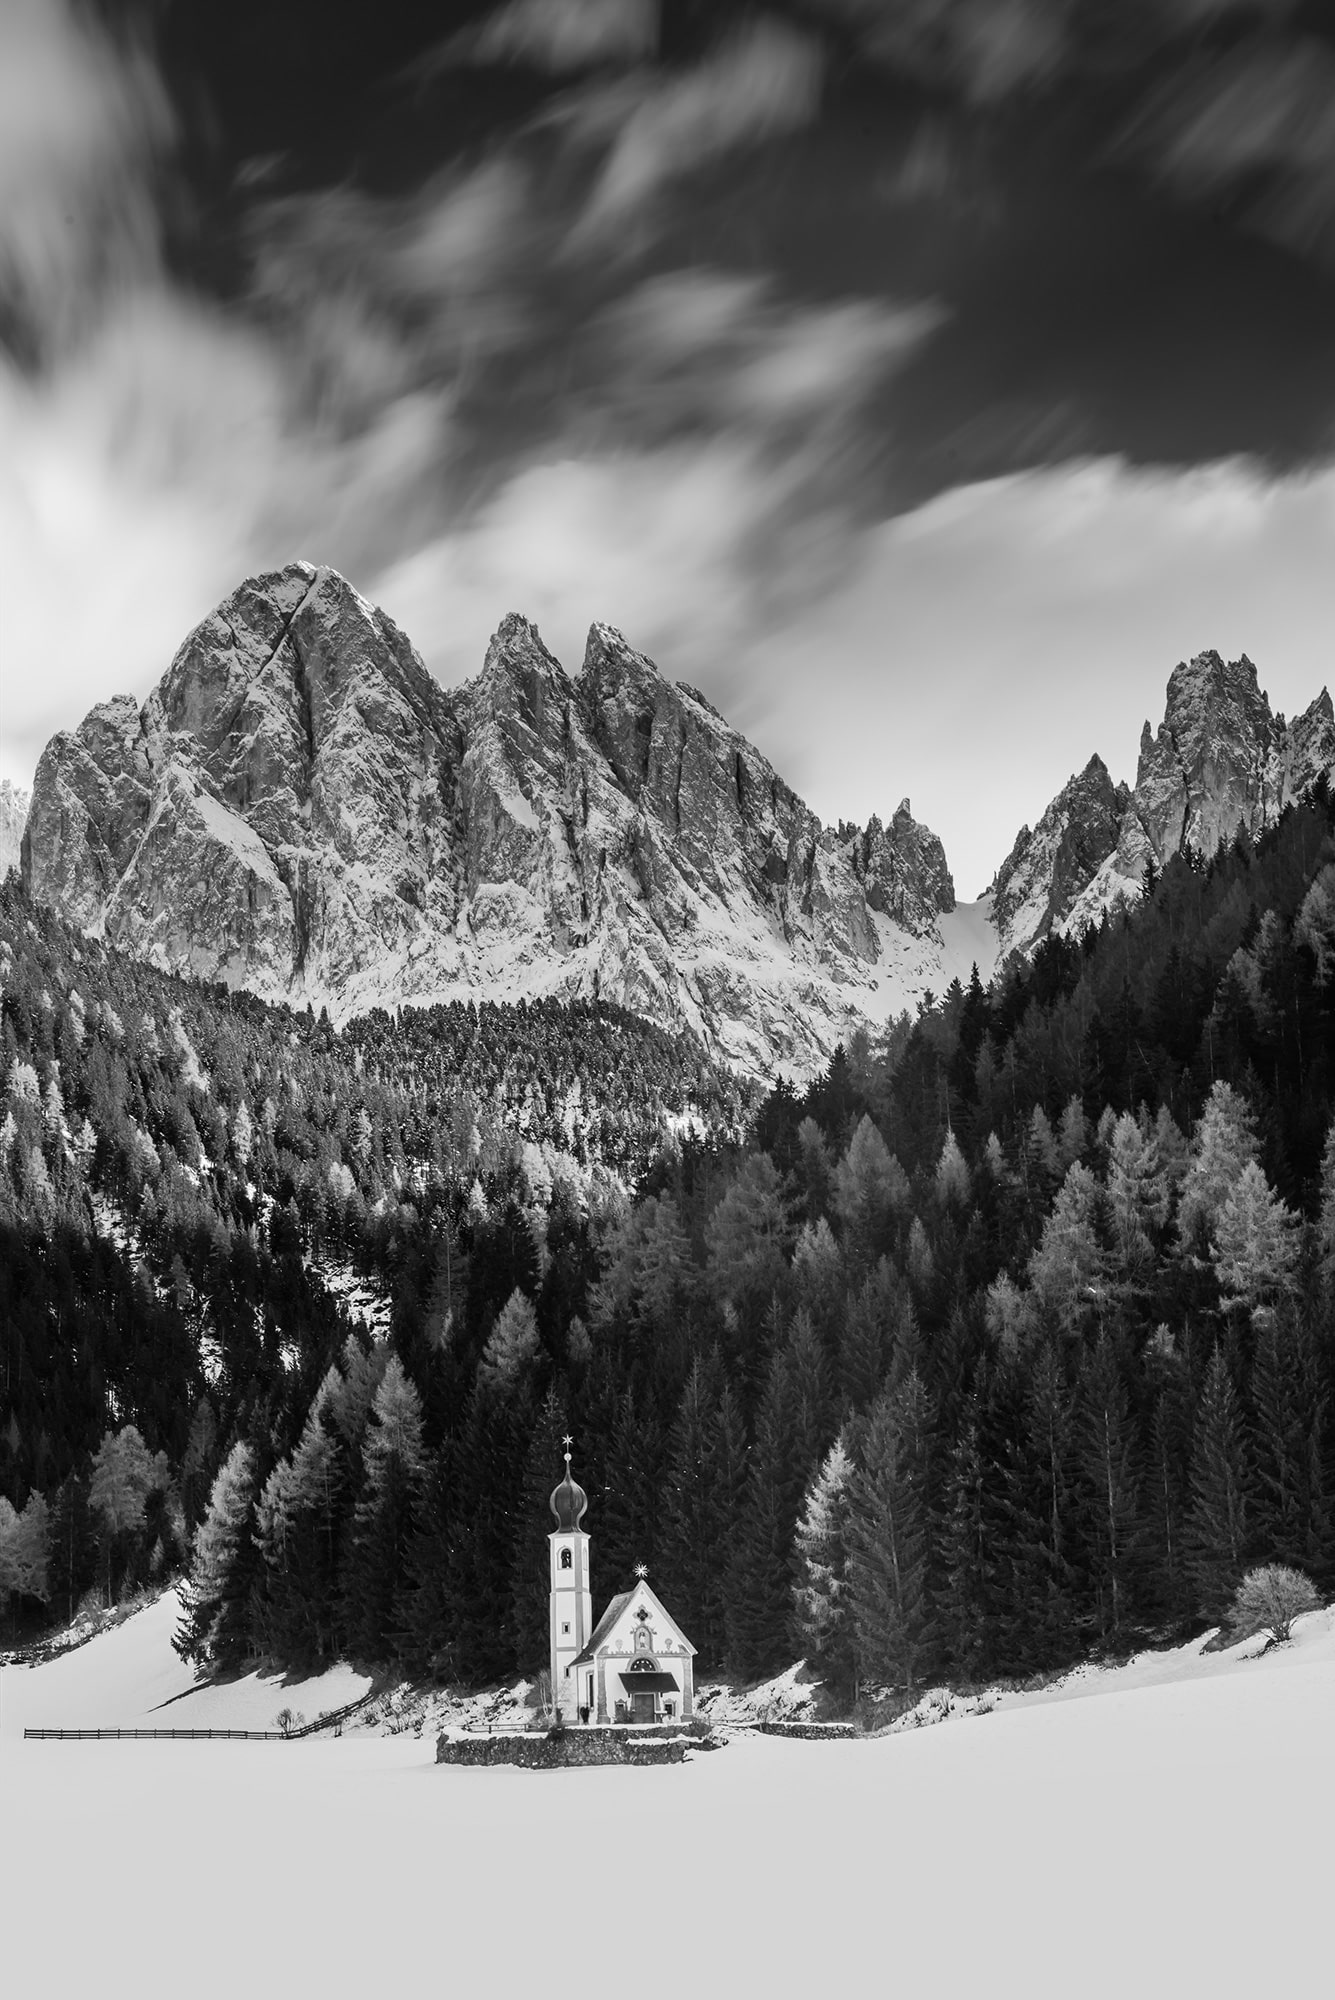 Experience the striking contrast of light and shadow in this dramatic black and white landscape photograph of the Chiesetta di San Giovanni in Ranui, nestled in the heart of the Dolomites. Captured by renowned photographer Jennifer Esseiva with her Nikon D810, this image showcases the timeless beauty of the iconic church against the rugged backdrop of the mountains. The monochromatic tones add depth and intensity to the scene, highlighting the intricate details of the architecture and the surrounding landscape. Jennifer Esseiva's skillful composition and mastery of black and white photography invite viewers to immerse themselves in the timeless allure of this iconic location in the Dolomites.